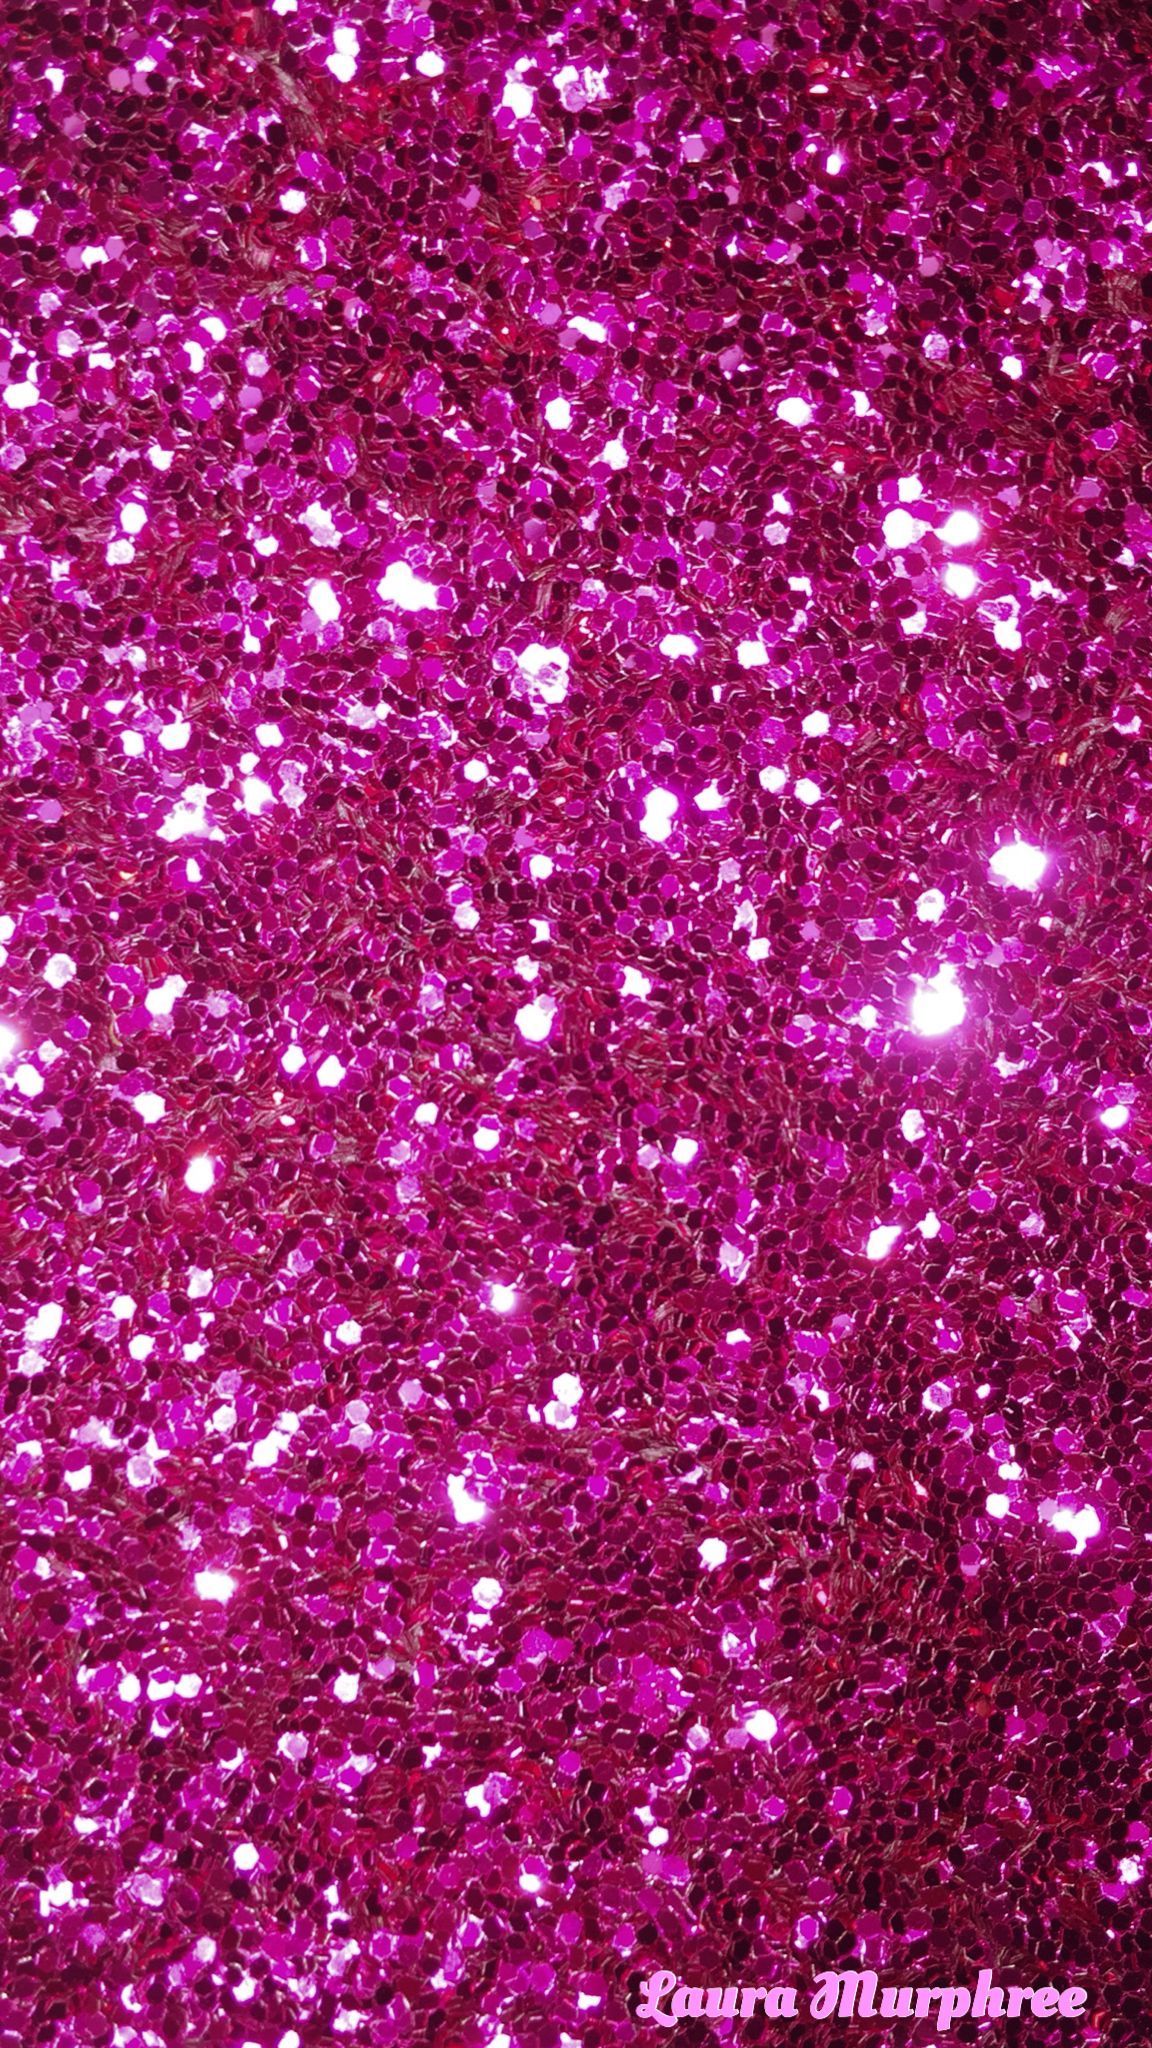 sparkly pink wallpaper